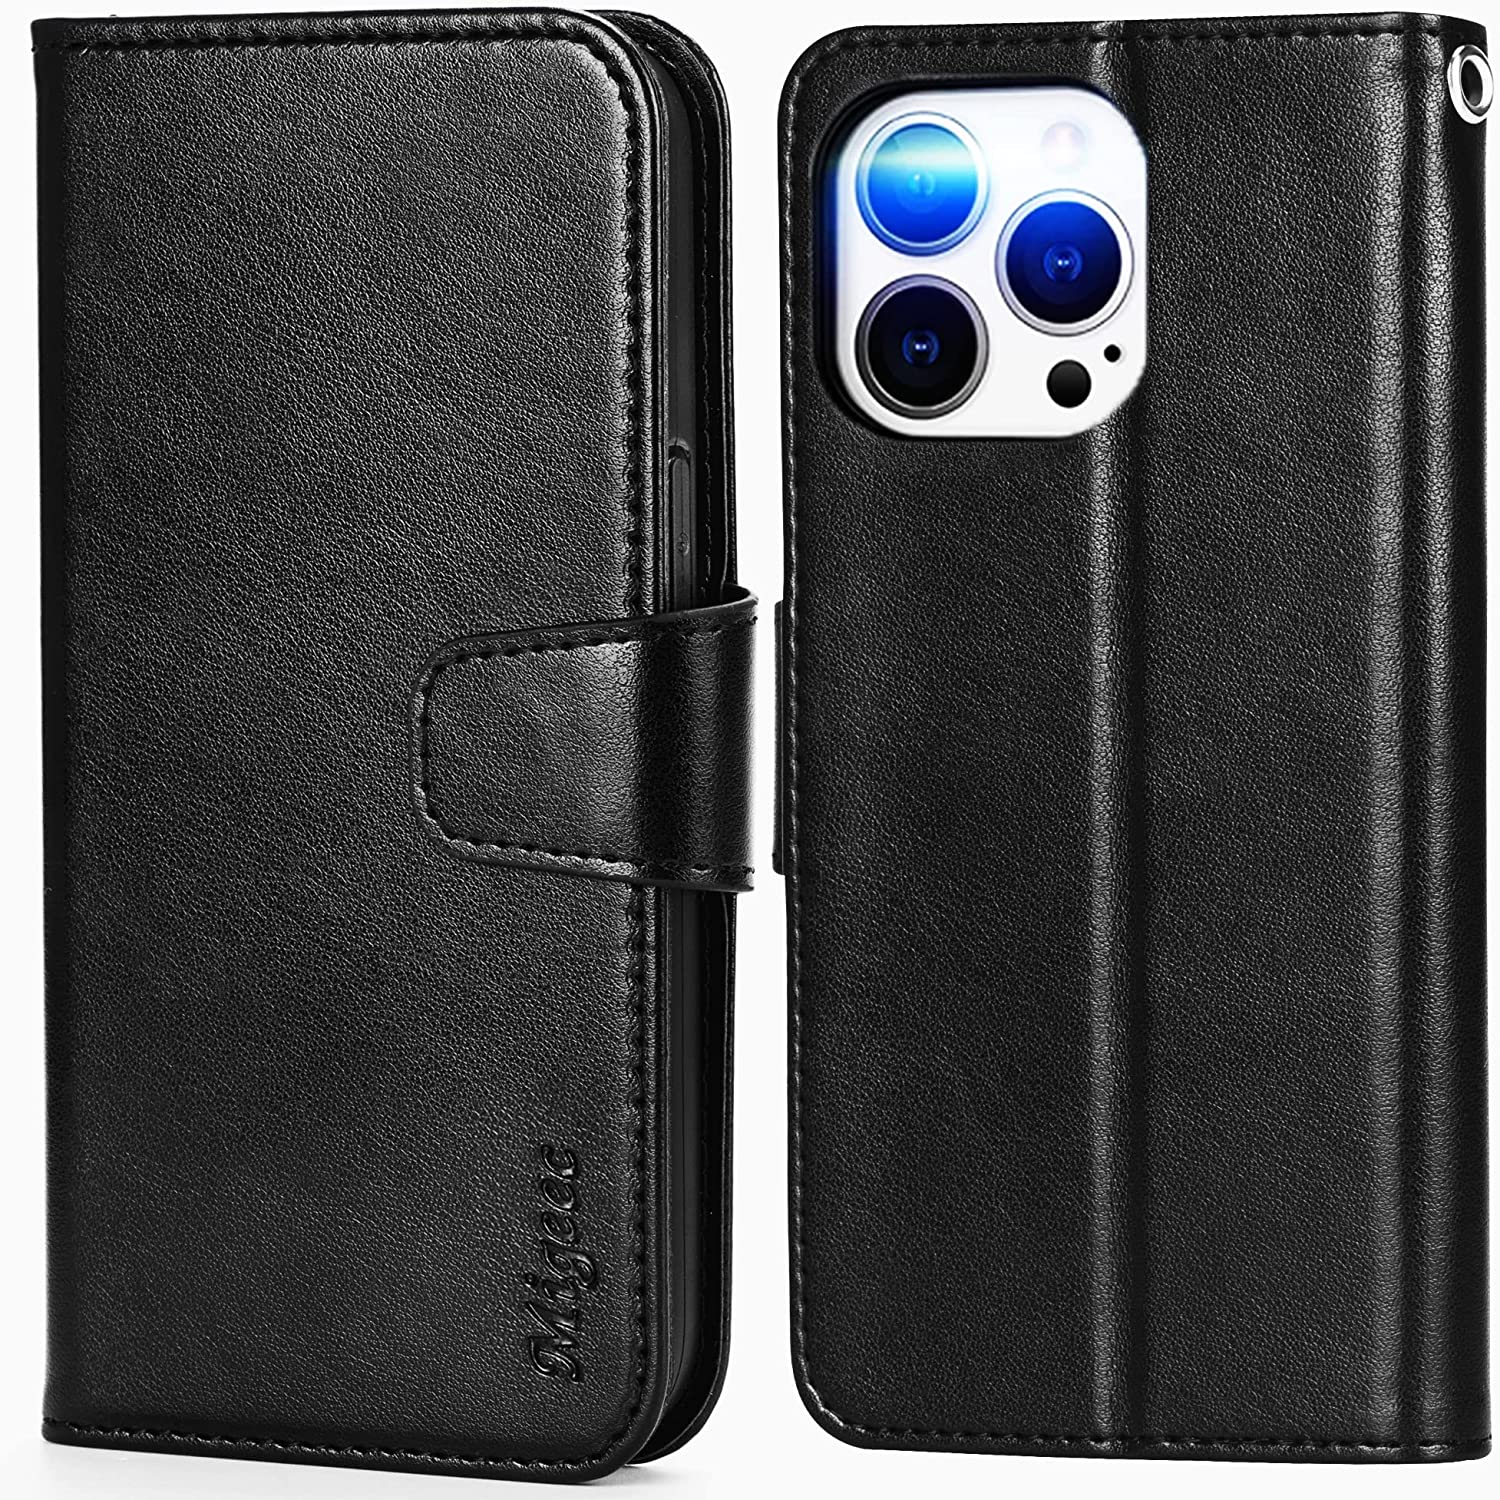 Snugg iPhone 13 Mini Case Wallet – Folding Wallet Case with 3 Card Slots,  Magnet Closure, and Phone …See more Snugg iPhone 13 Mini Case Wallet –